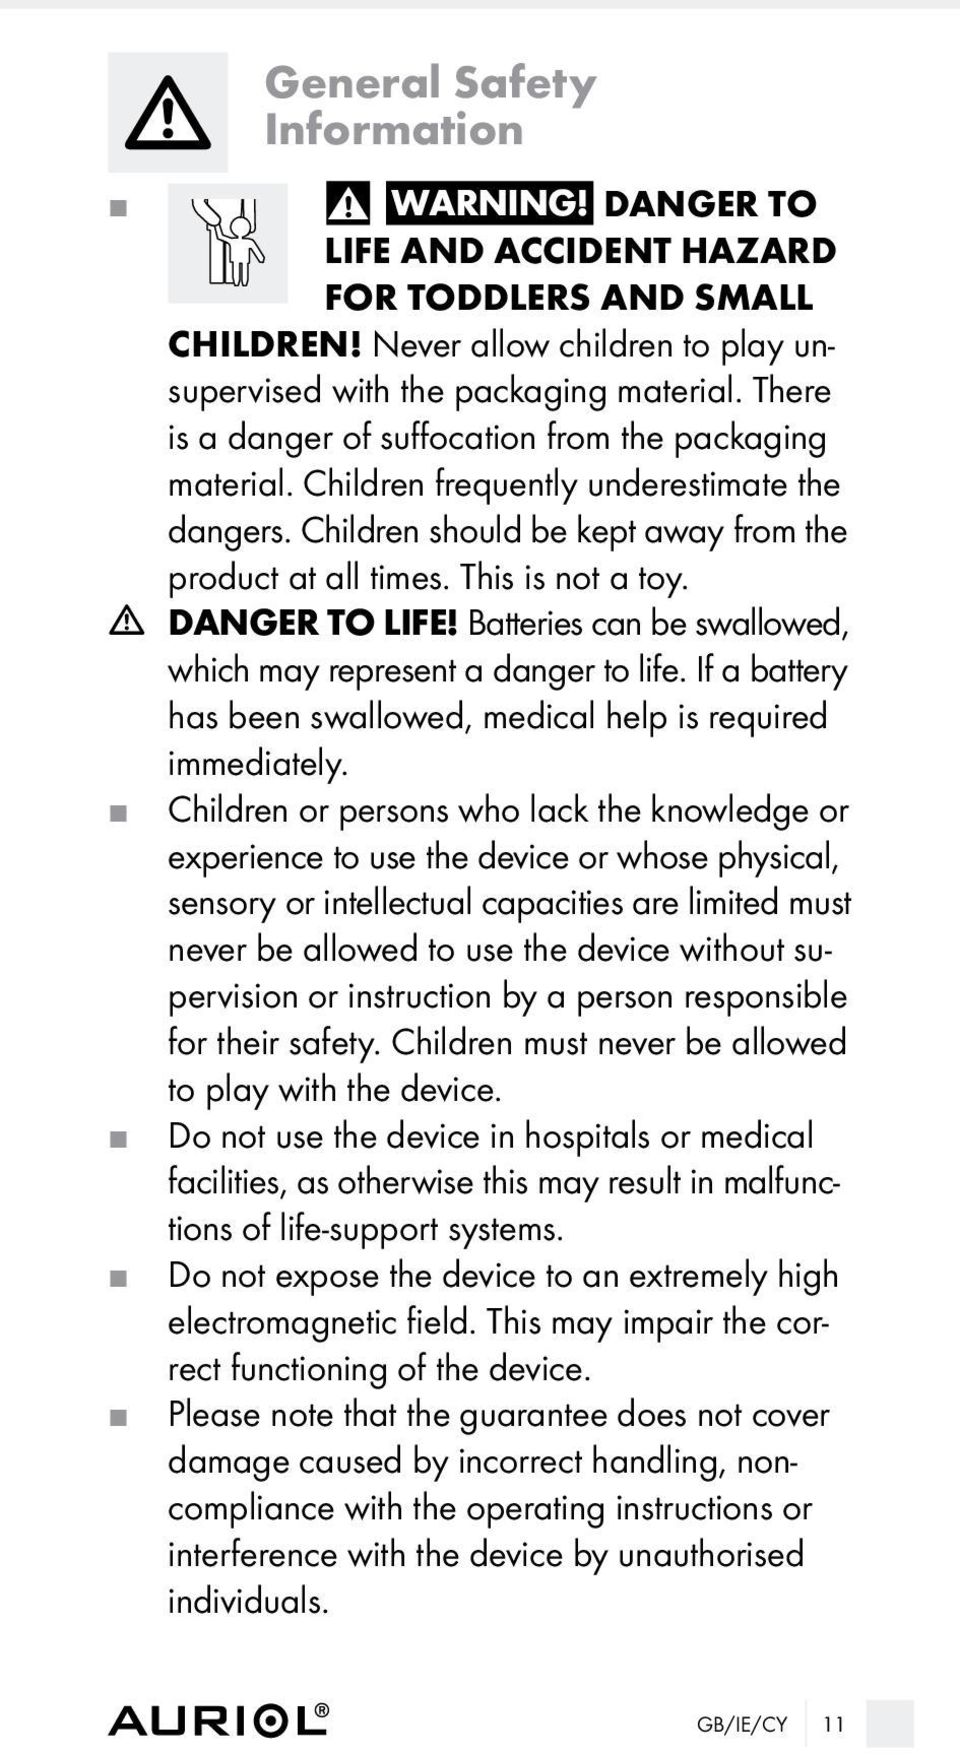 m DANGER TO LIFE! Batteries can be swallowed, which may represent a danger to life. If a battery has been swallowed, medical help is required immediately.